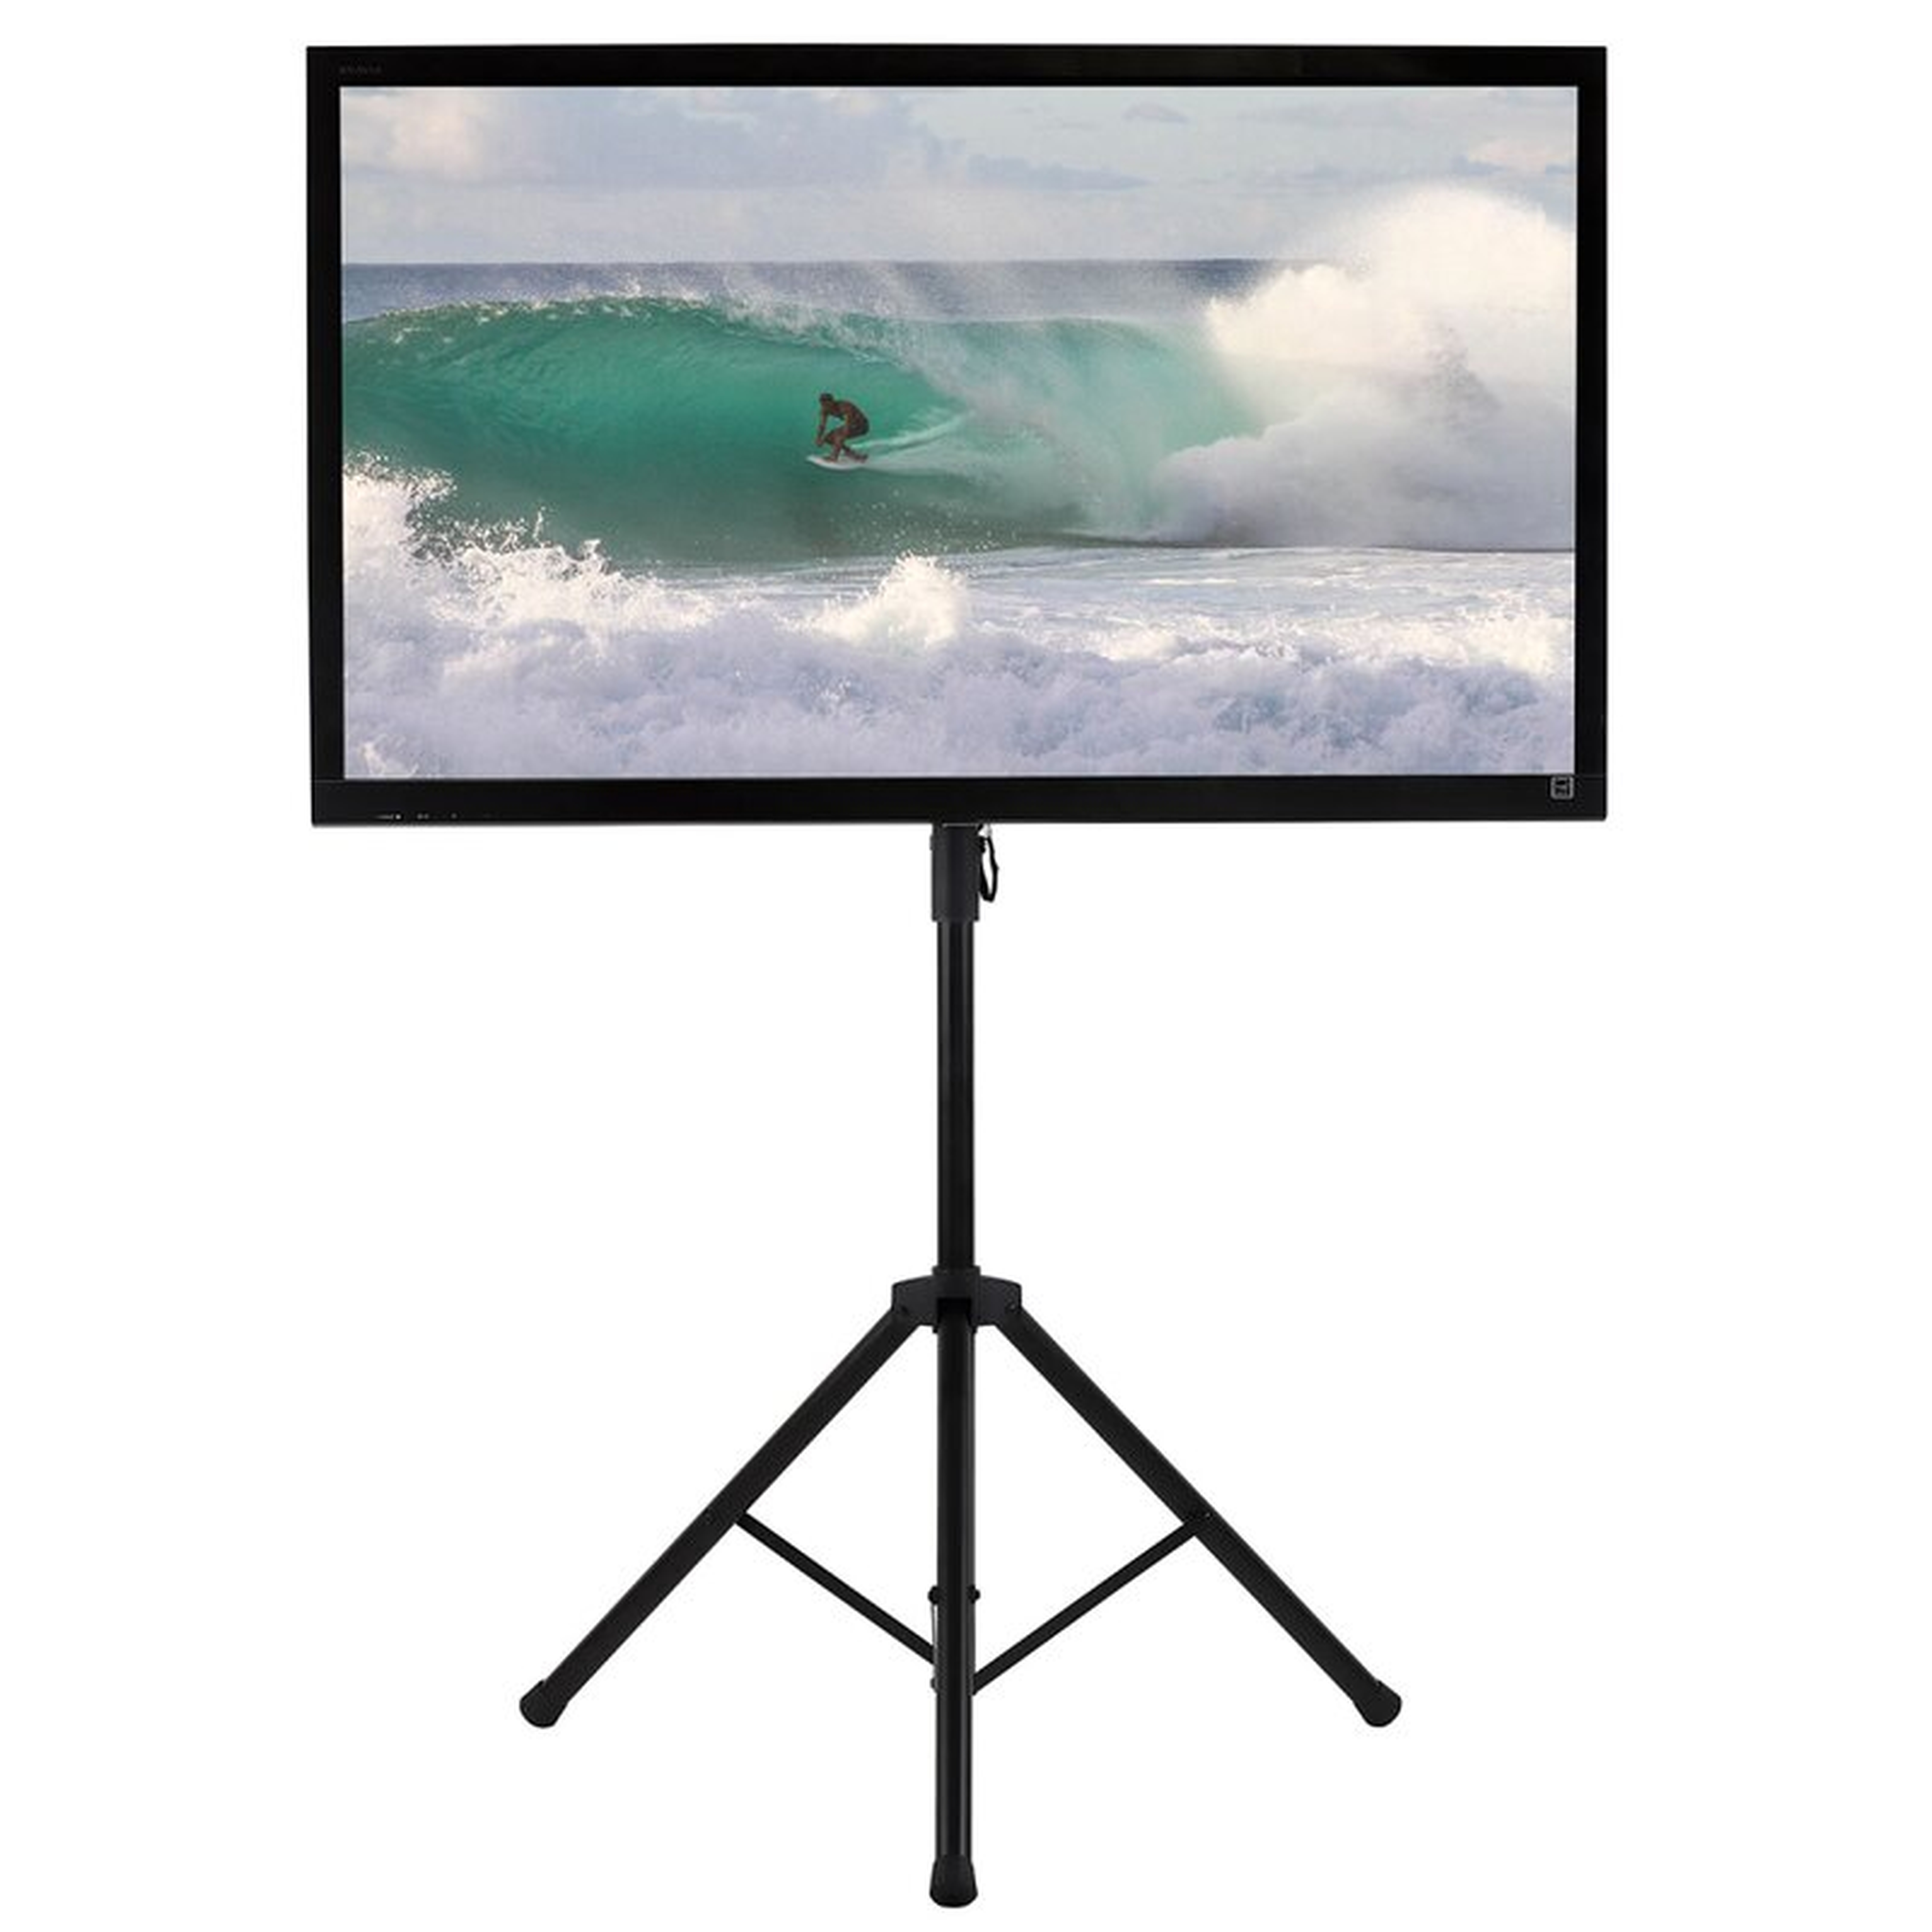 Hicks Symple Stuff Black Motorized Floor Stand Mount for Screens Holds up to 77 Lb. lbs - Wayfair